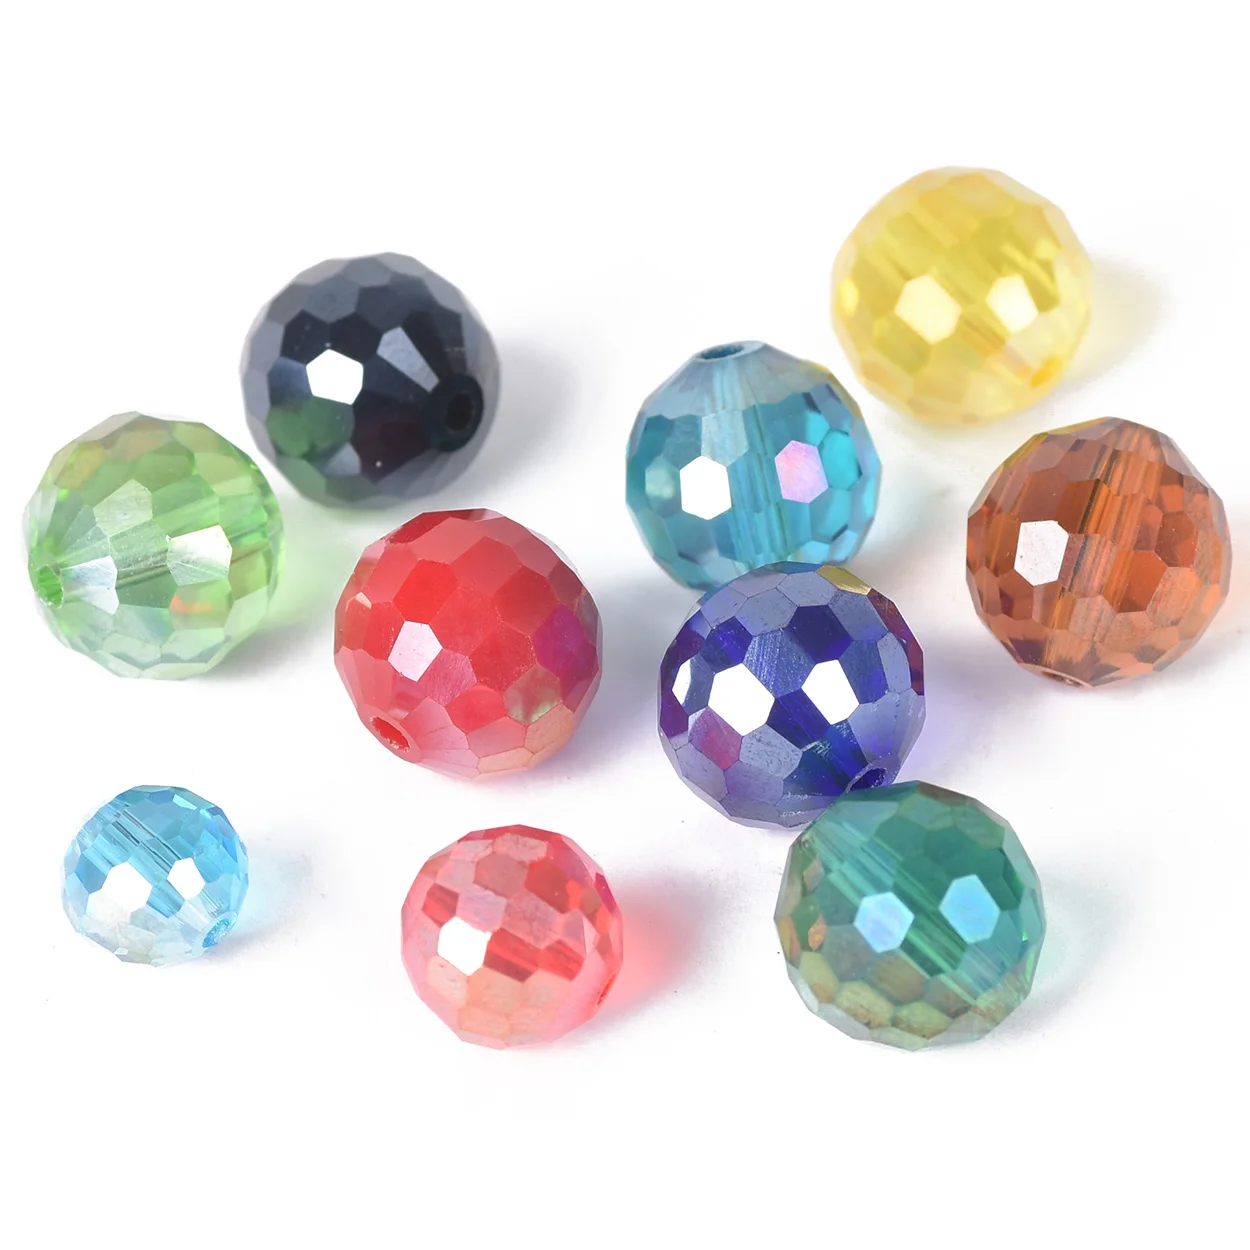 ntn japan original import 6004zz 6004llu 20 42 12mm deep groove ball bearing abec 9 high precision speed metal rubber bearings Round 96 Facets Cut Disco Ball AB Plated 6mm 8mm 10mm 12mm Crystal Glass Loose Spacer Beads lot Colors for Jewelry Making DIY